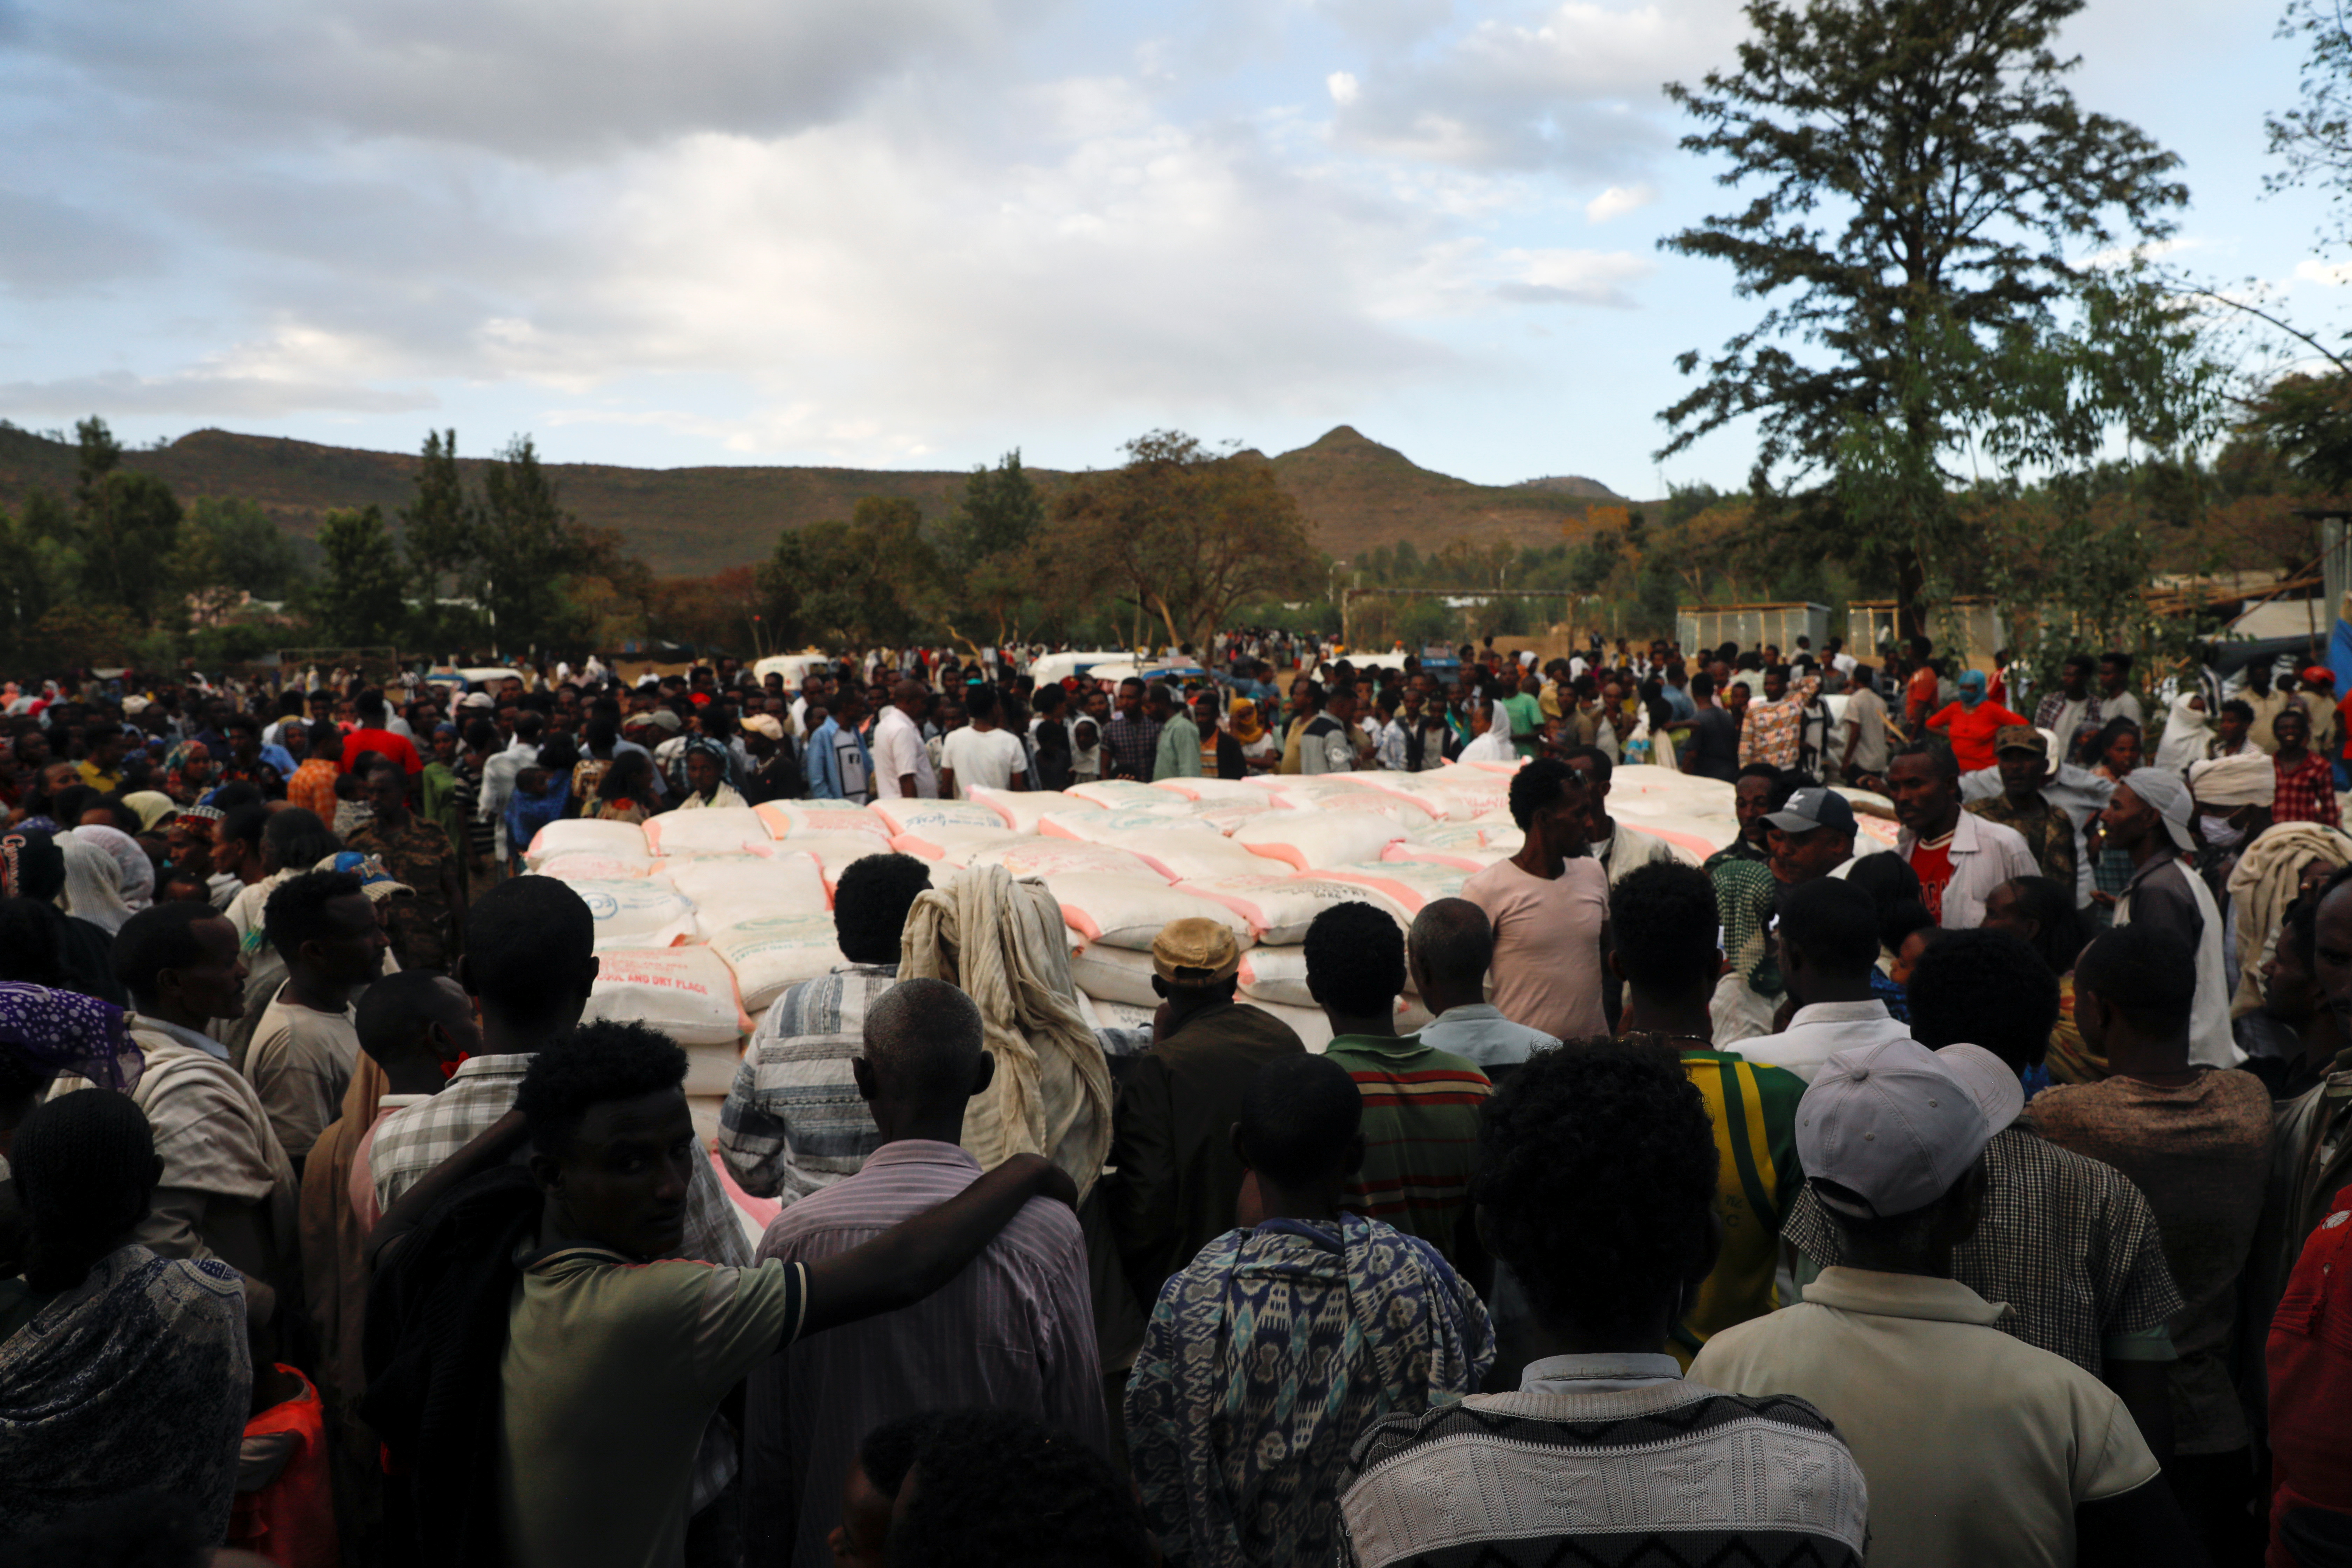 People stand in line to receive food donations, at the Tsehaye primary school in Shire